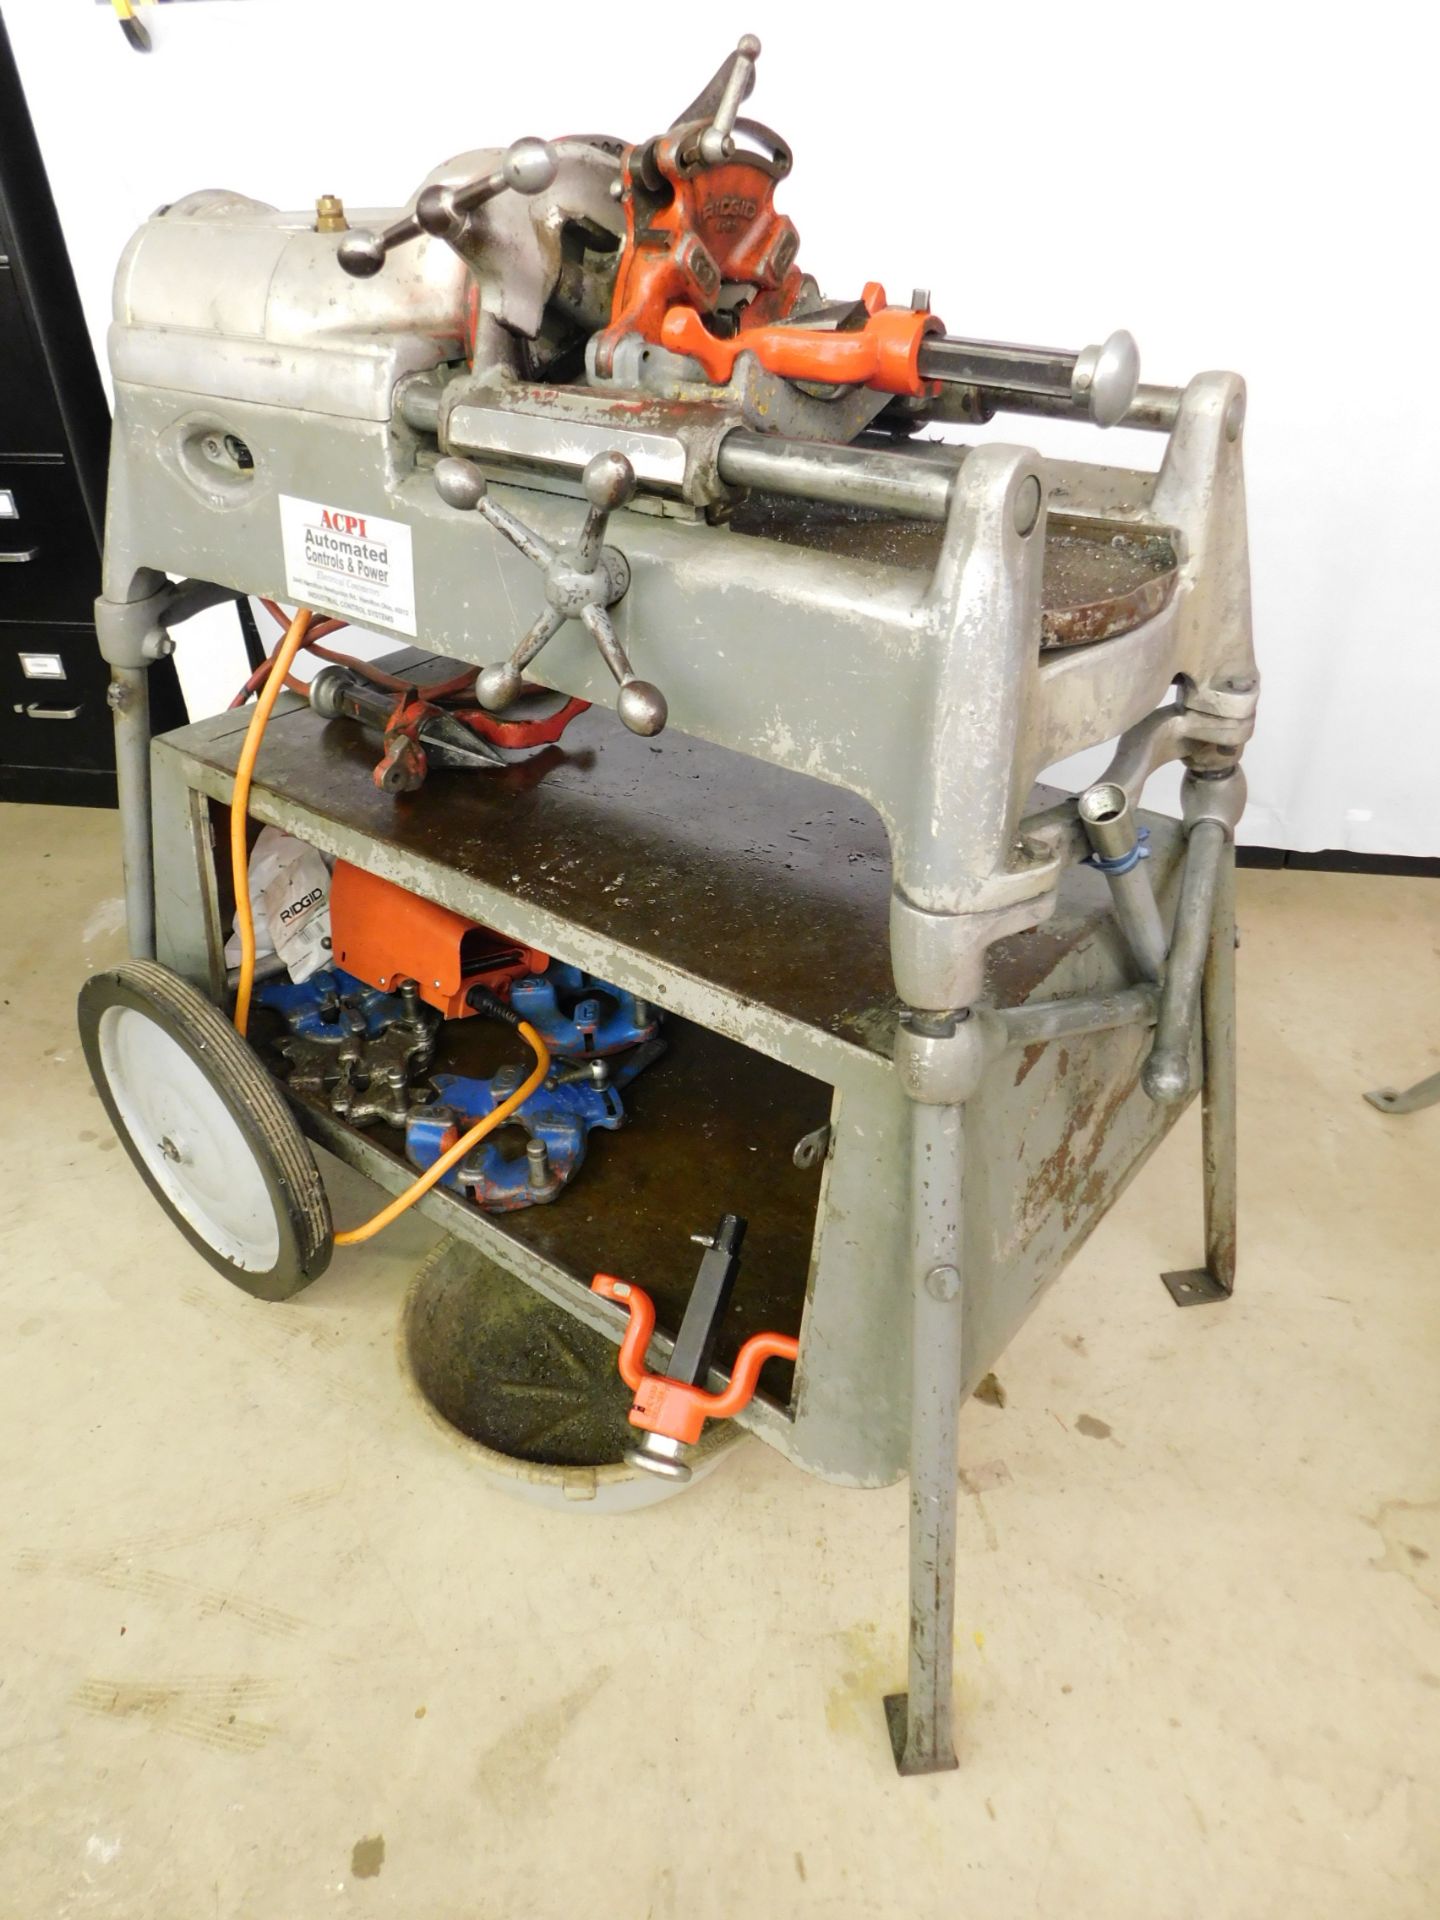 Ridgid Model 535 Power Threader, SN 361986, with Die Heads, Pipe Cutter, Pipe Reamer, and Foot Pedal